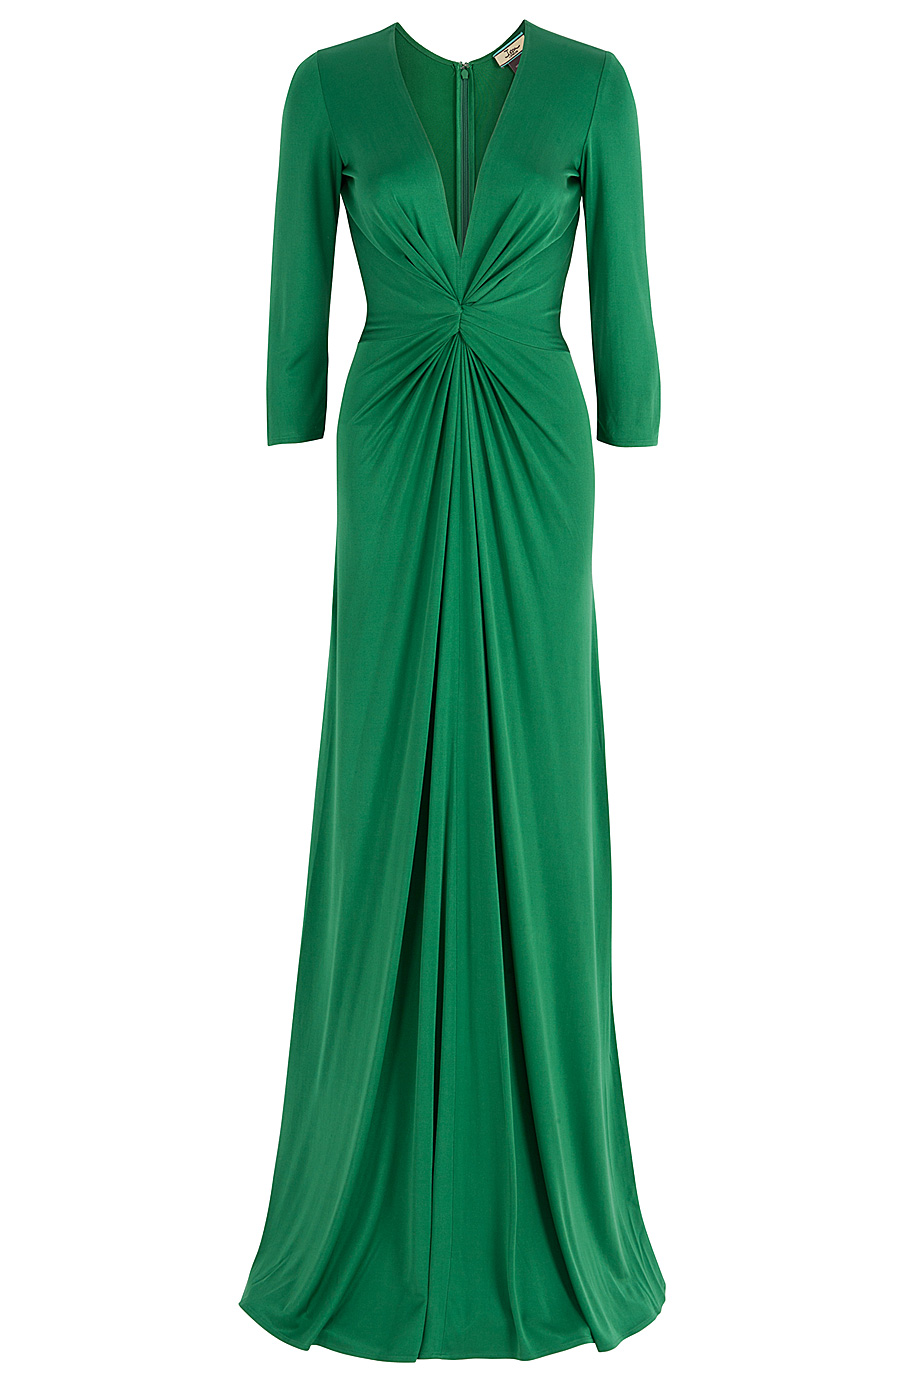 Issa Plunging V Neck Silk Jersey Gown in Green | Lyst